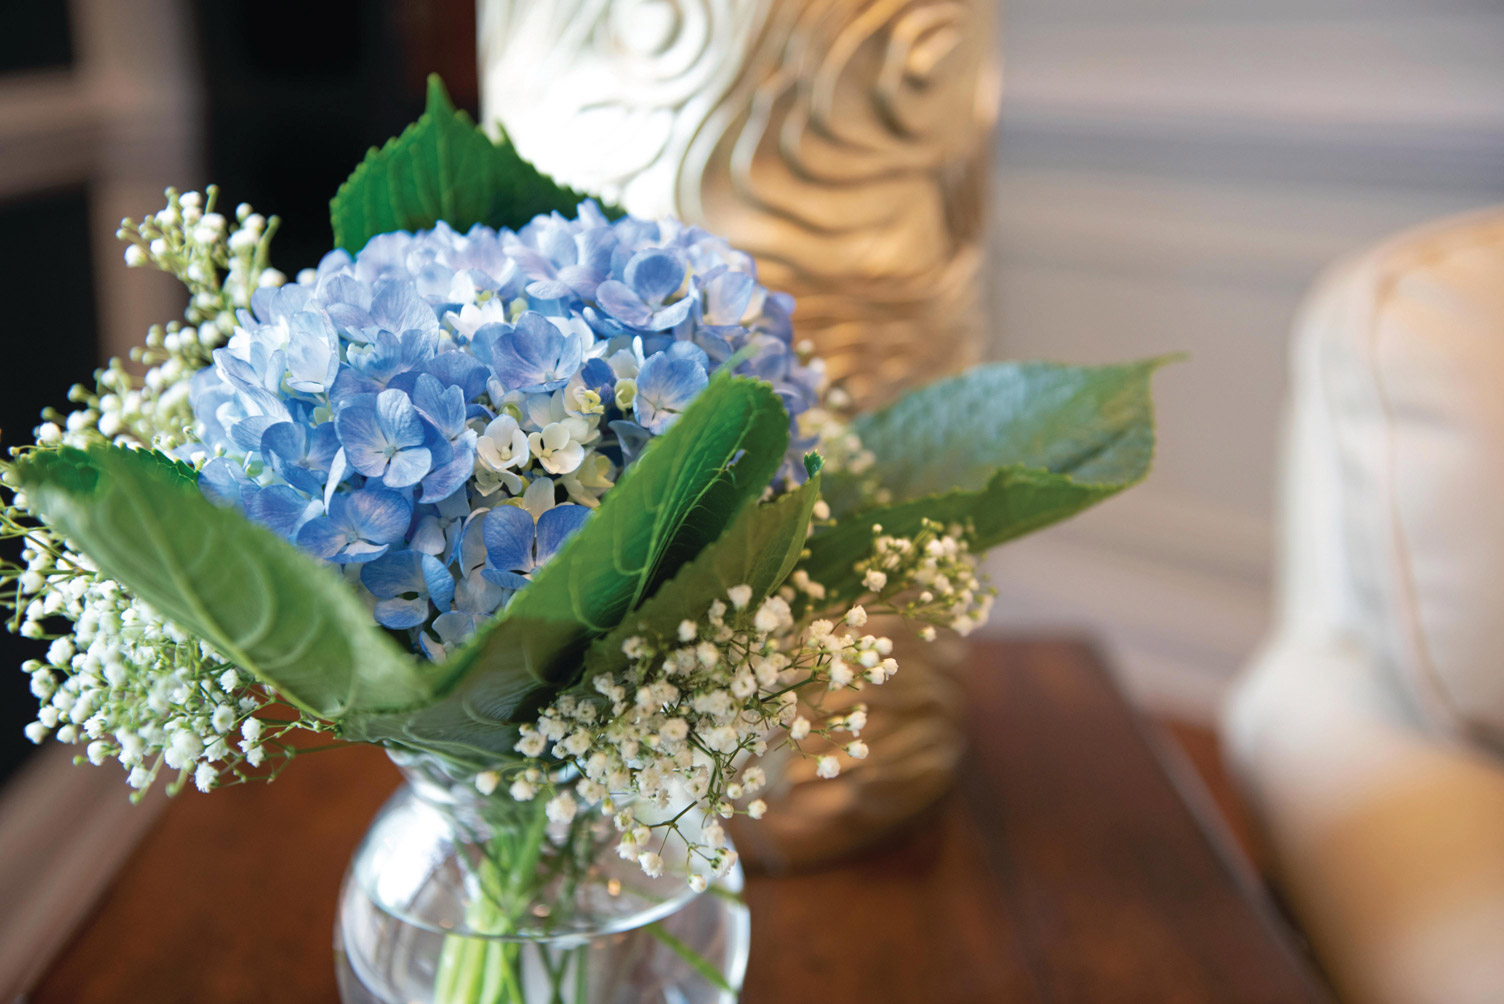 A glass vase with a blue and white floral. arrangement set atop a wooden table